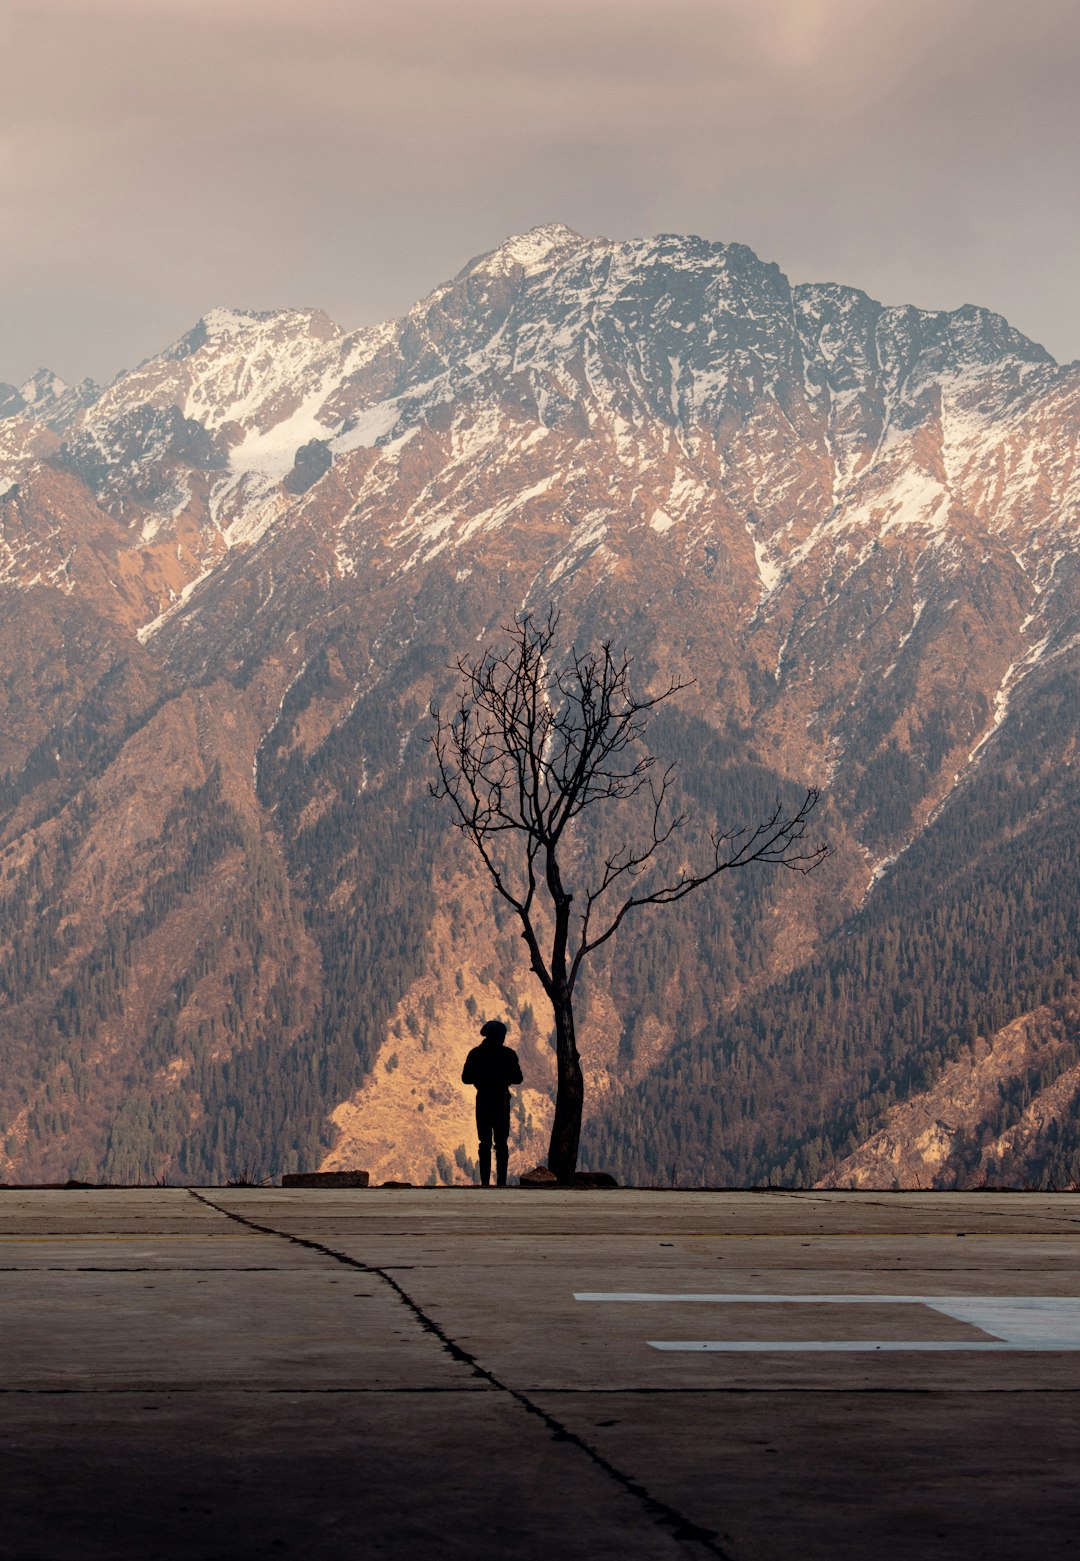 person standing on road near mountain range